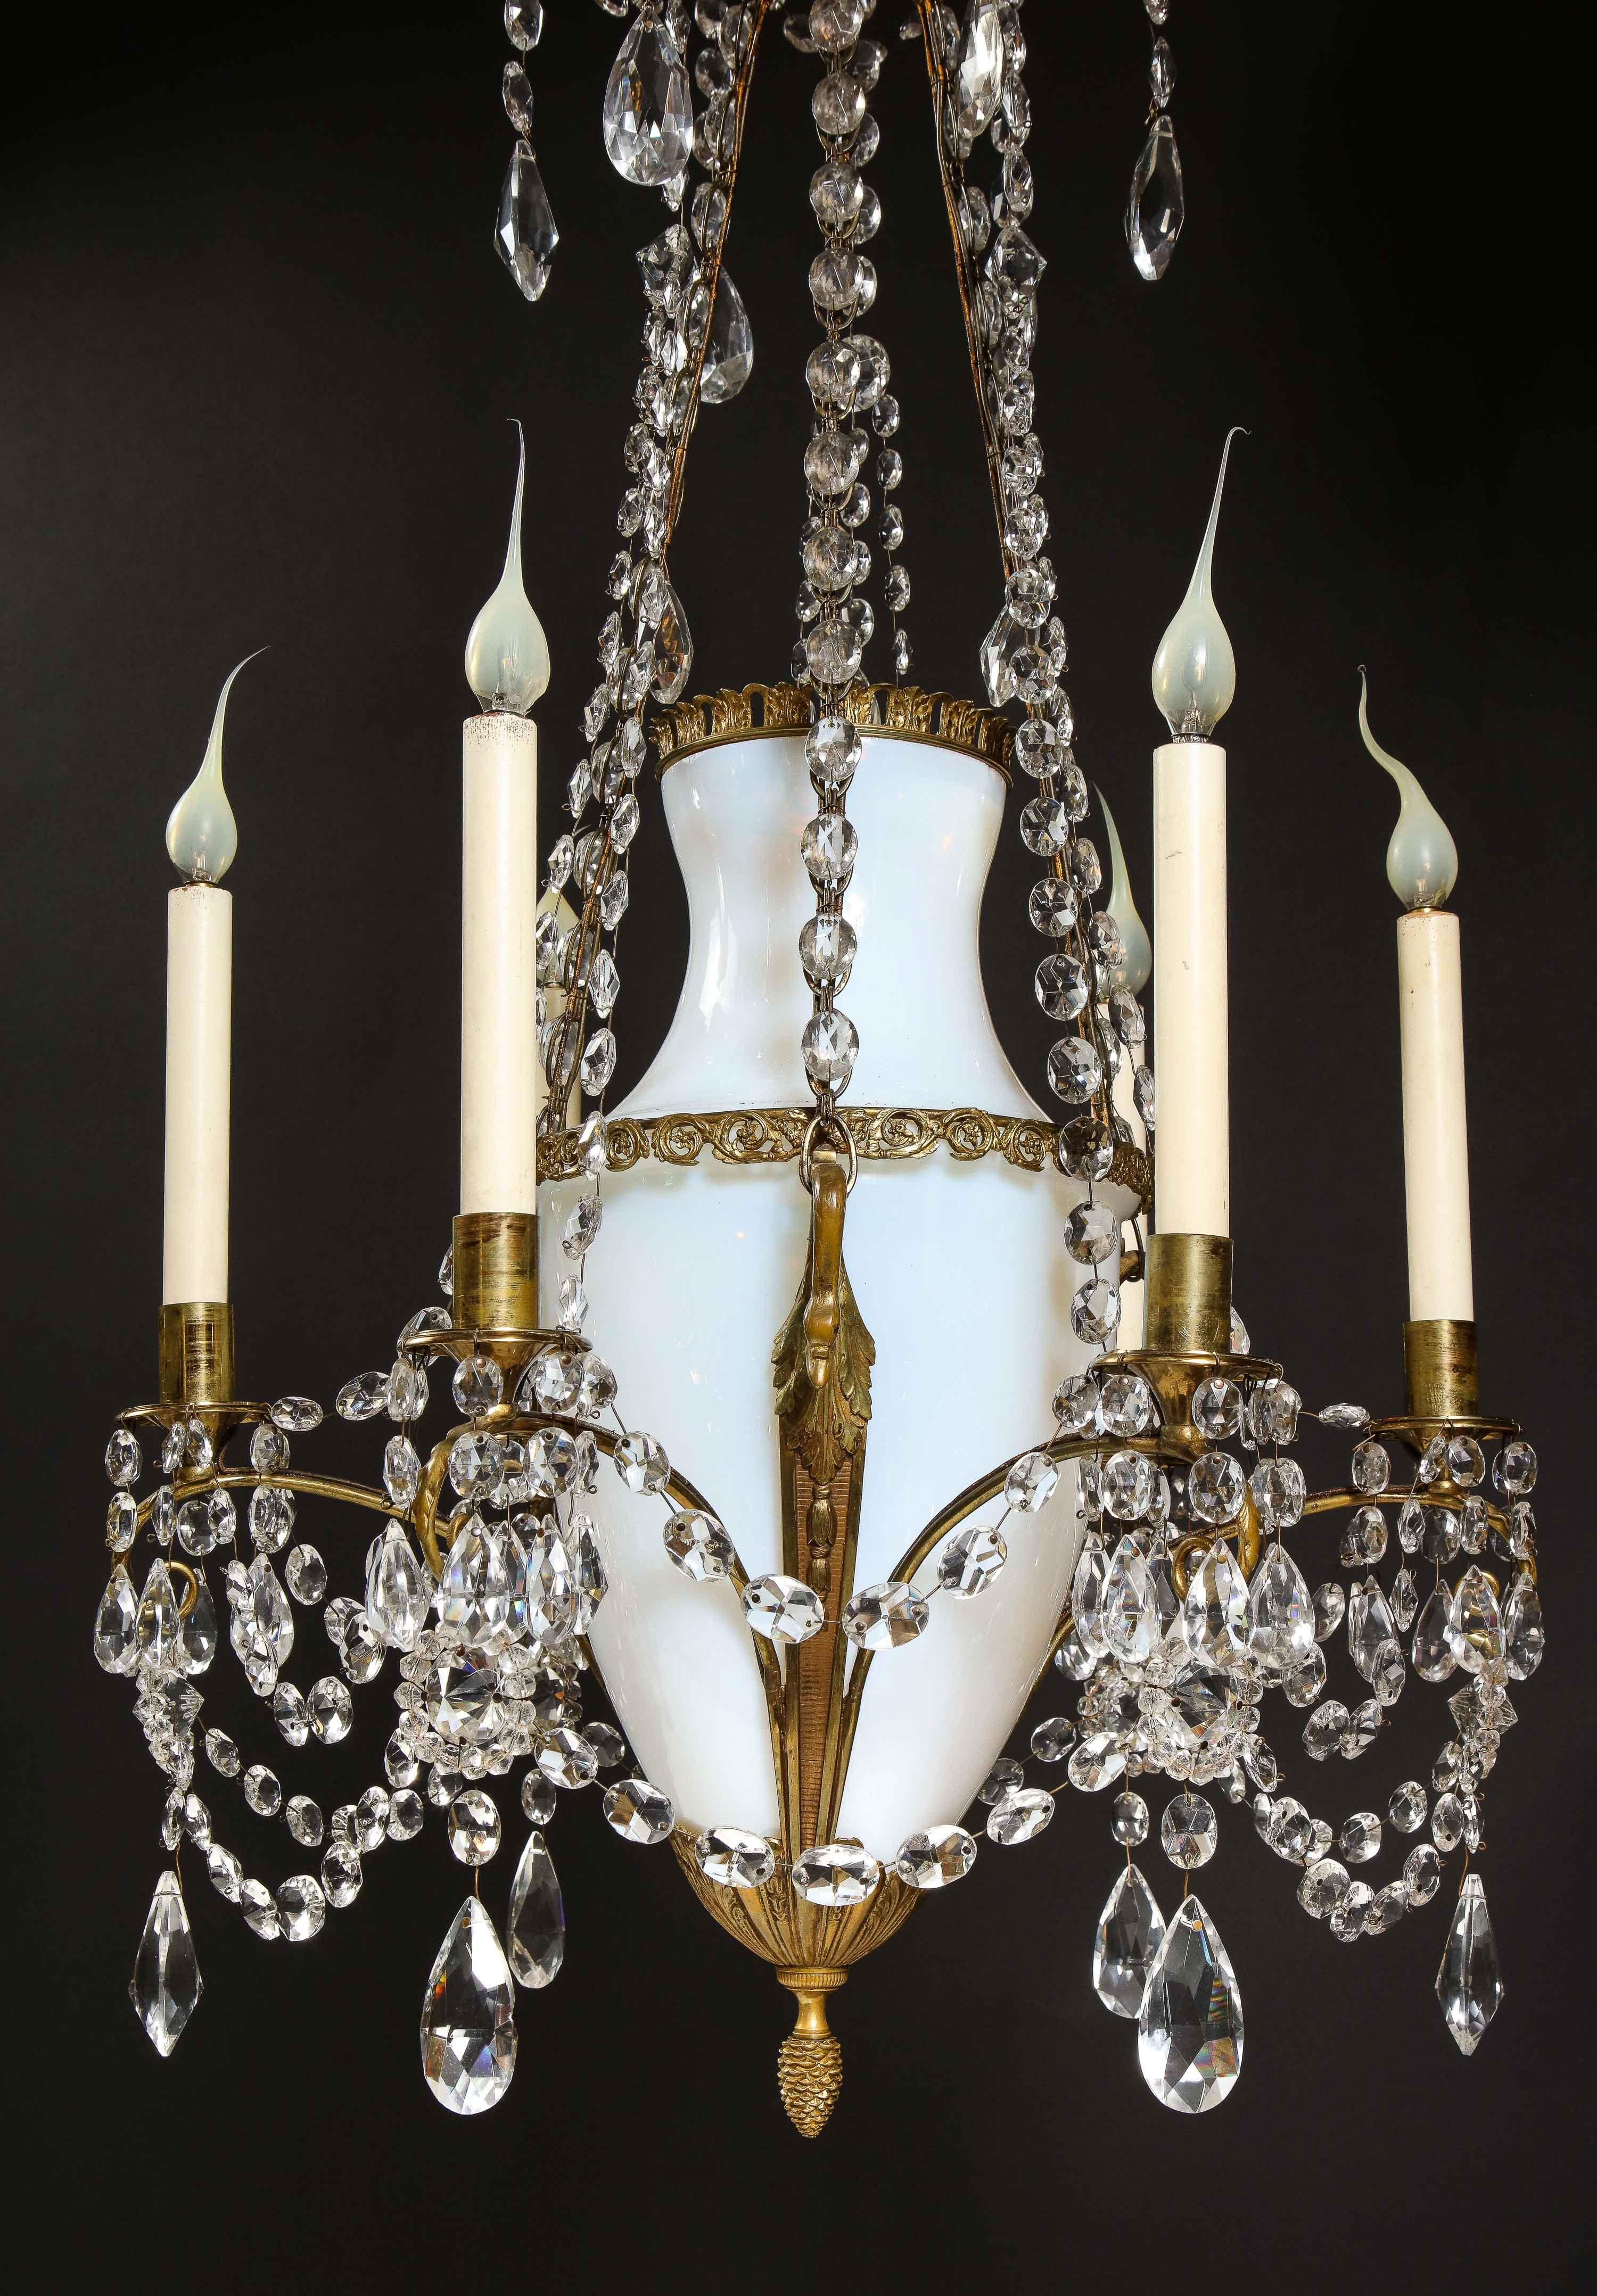 European Antique Russian Neoclassical Gilt Bronze, Opaline Glass and Crystal Chandelier For Sale